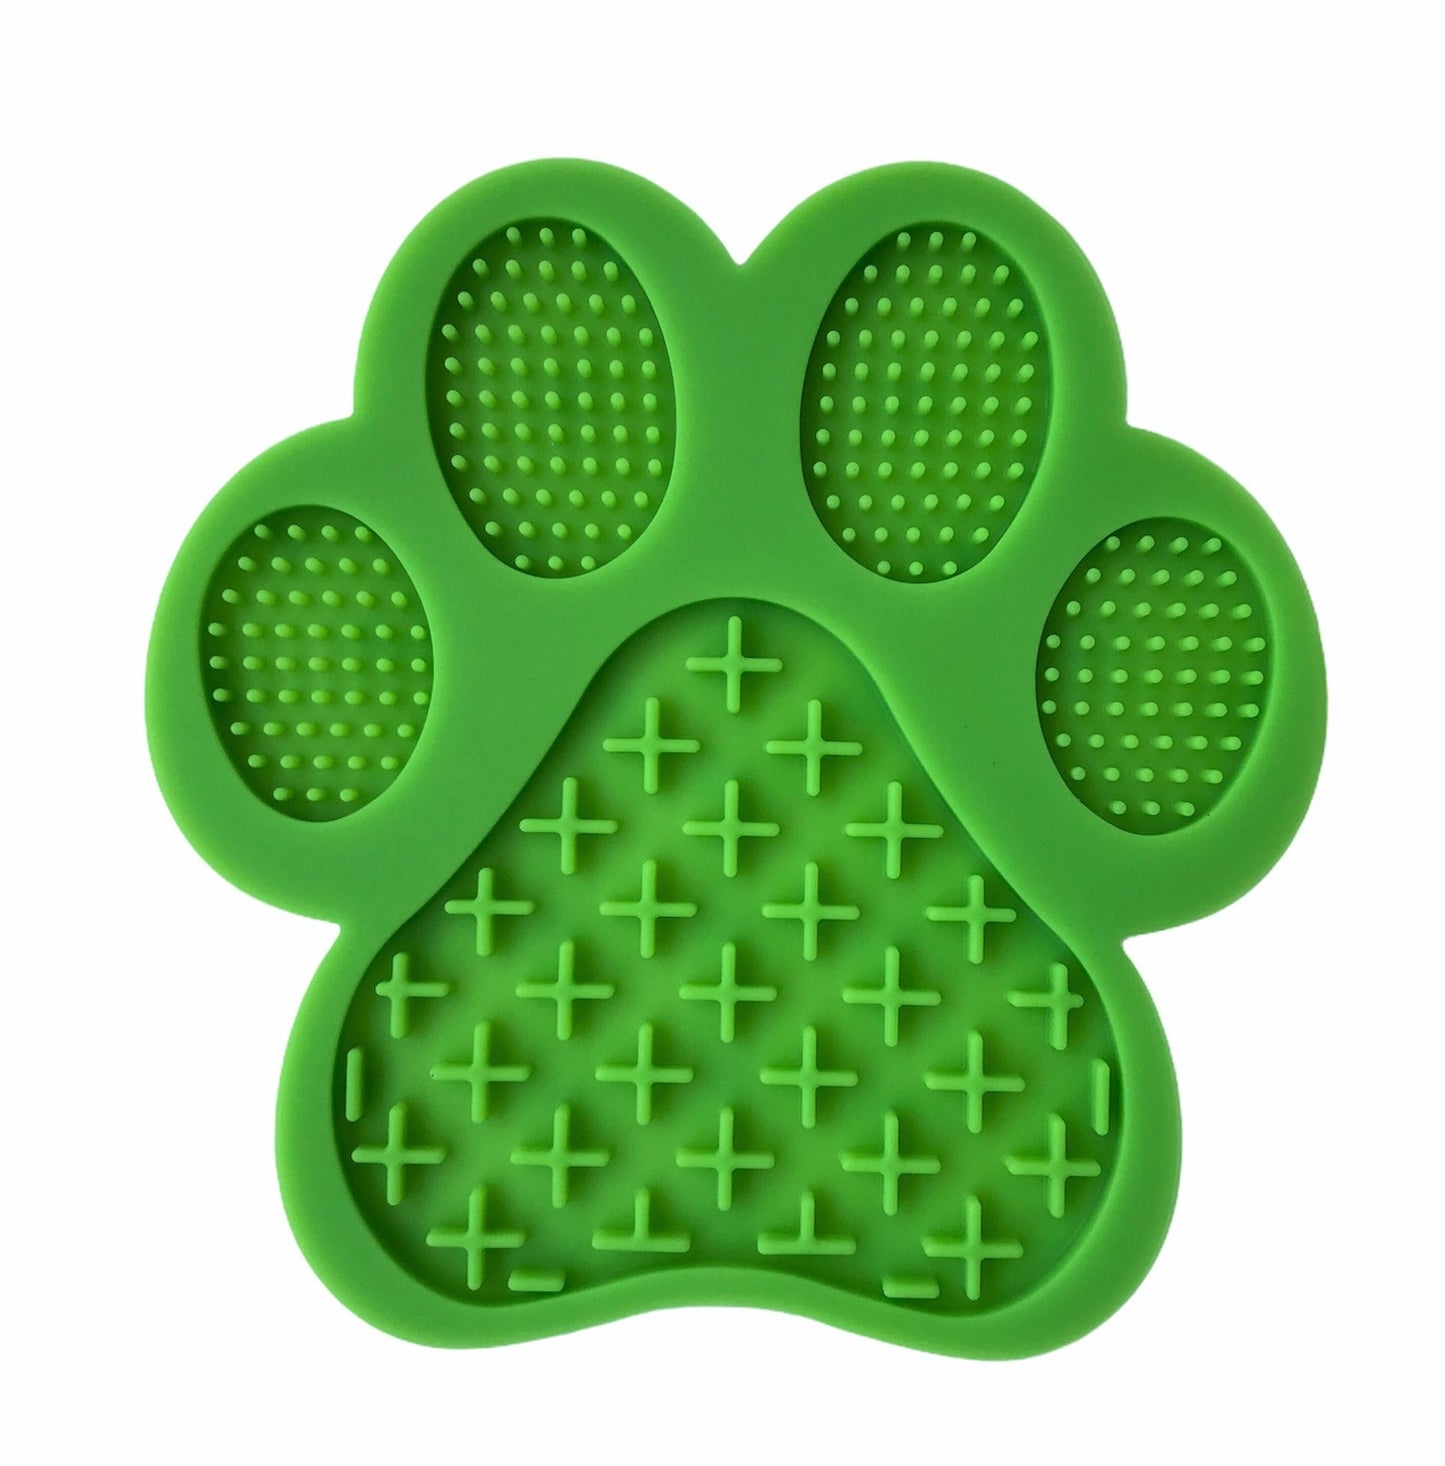 Everything you need to know about lick mats for dogs – Doggy Grub